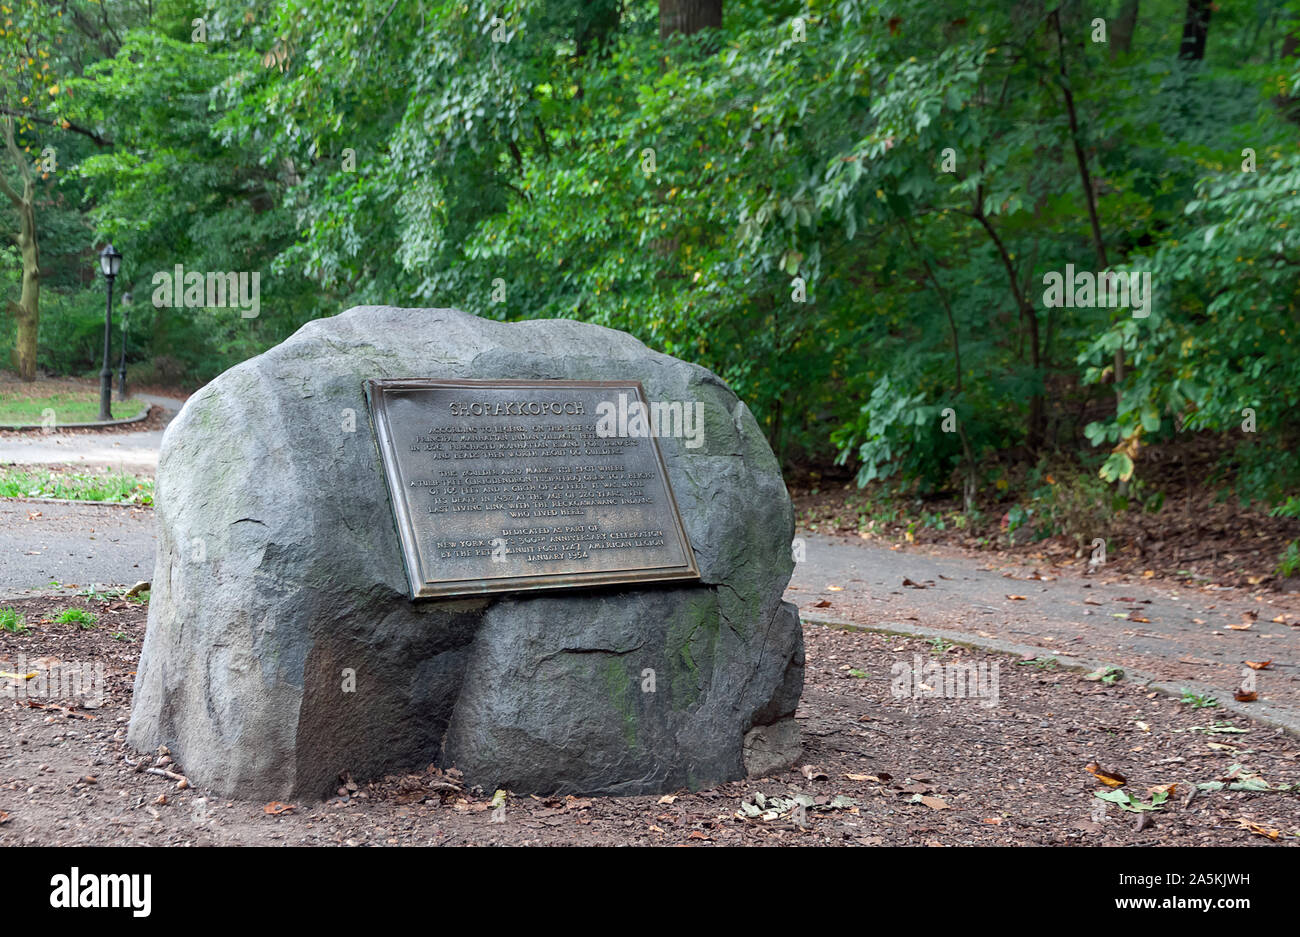 Shorakkopoch boulder marks the site where legend says Peter Minuit purchased Manhattan island from the indians for trinkets & beads worth 60 guilders. Stock Photo